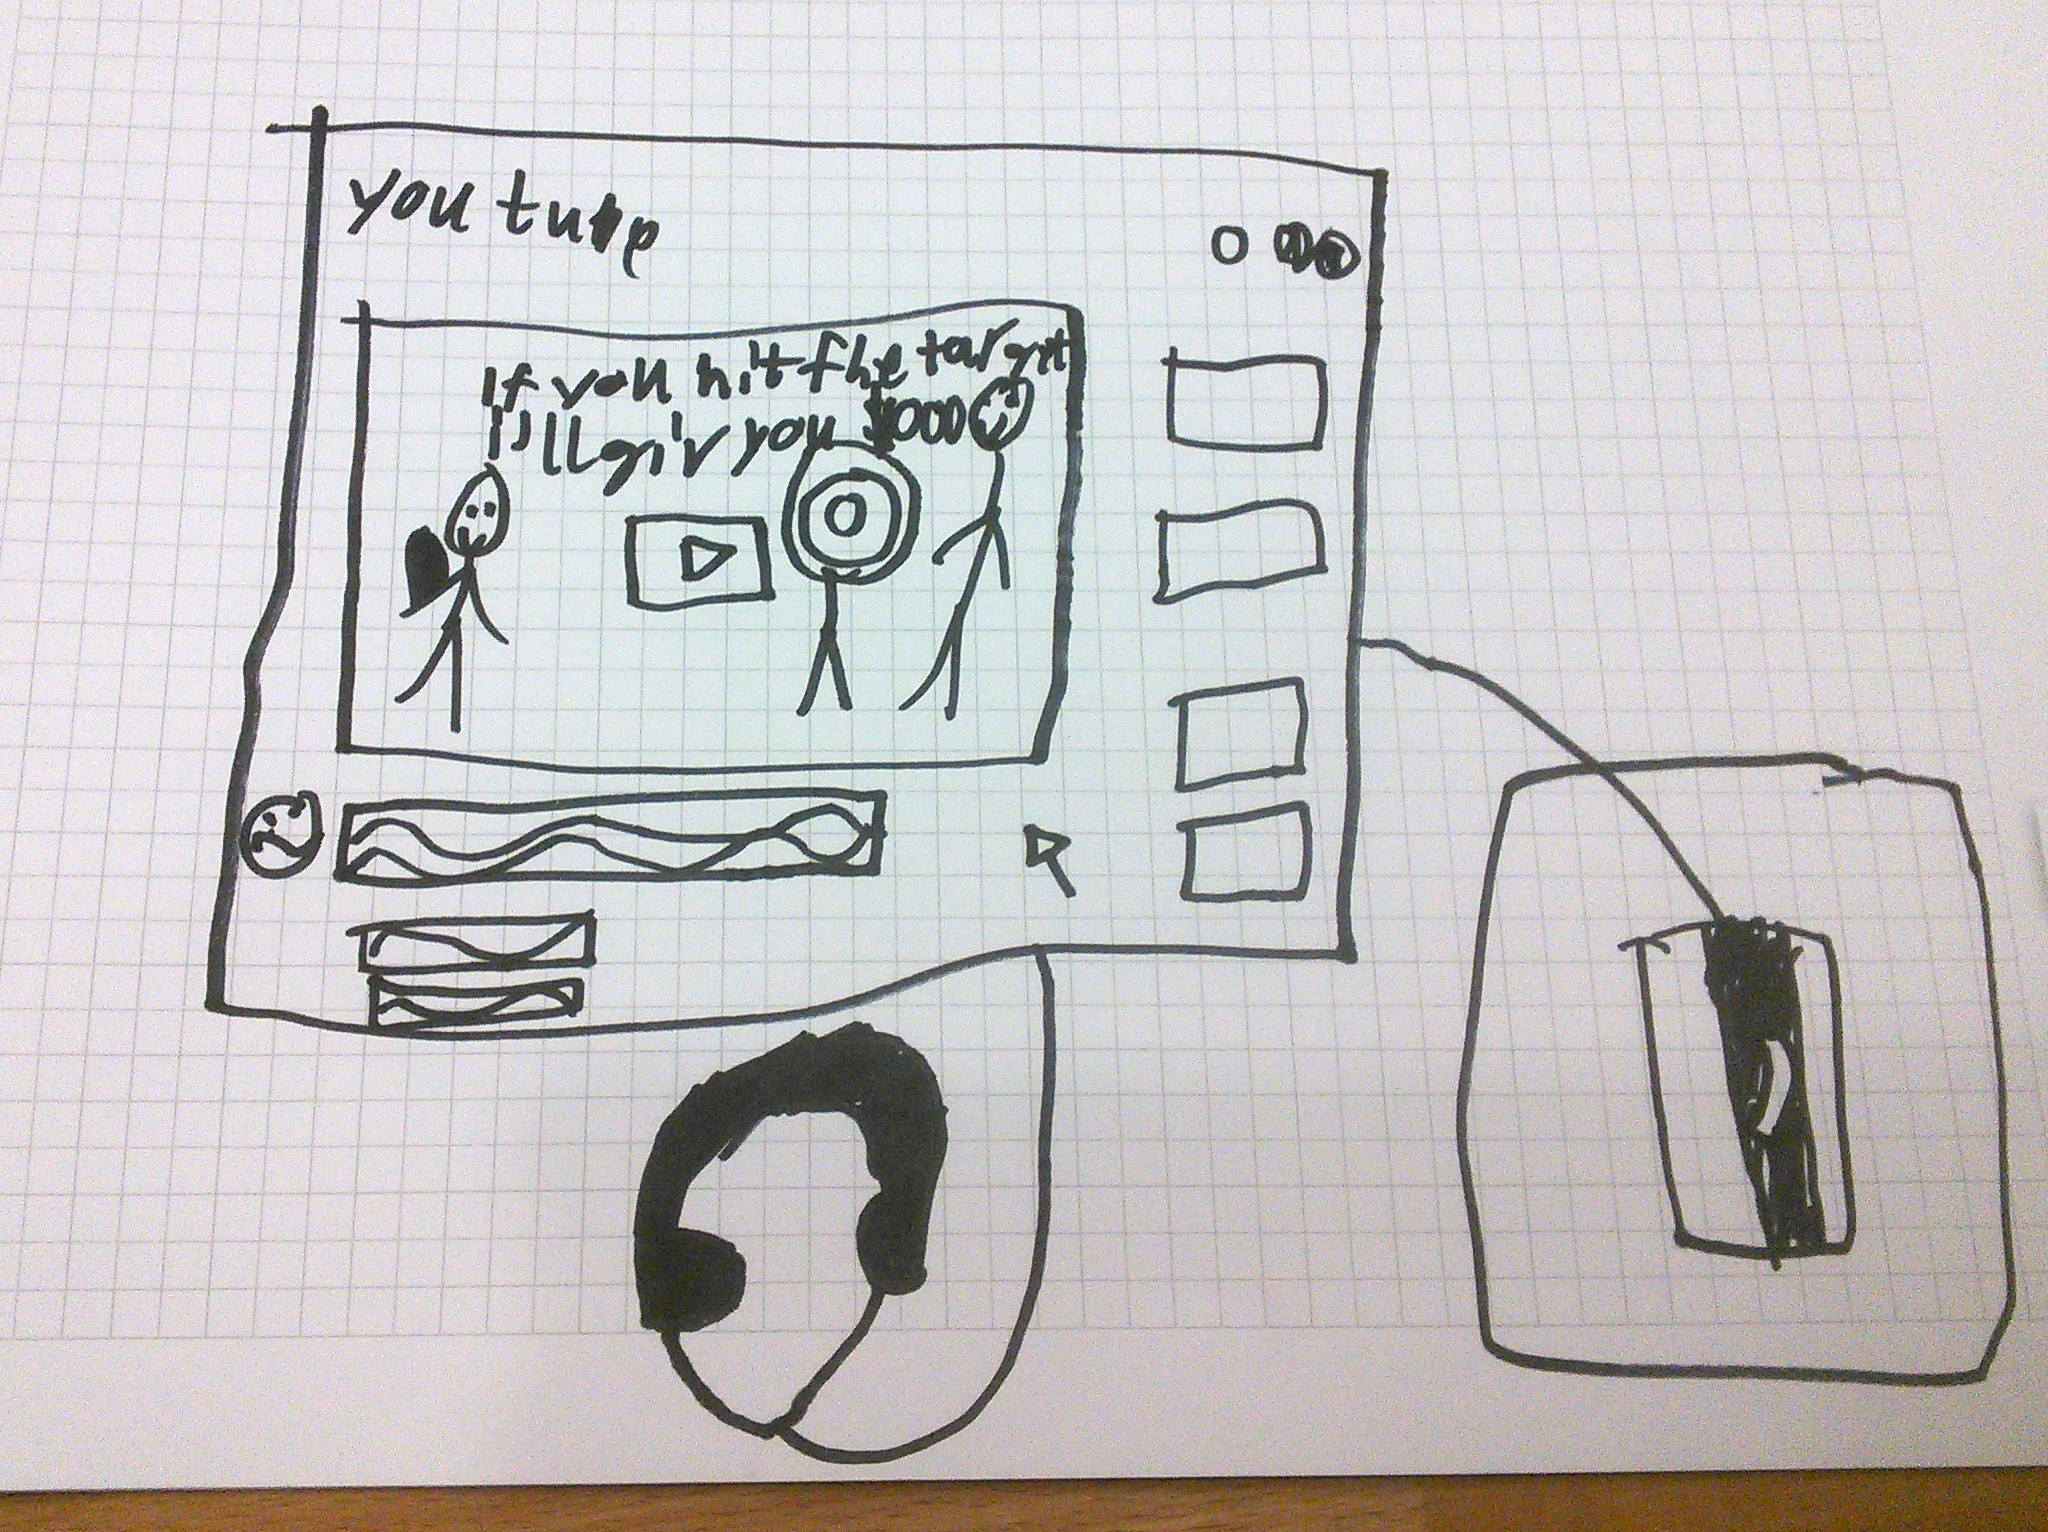 drawing of the internet by a 10 year old showing a Youtube prank channel, an external device trackpad, and headphones